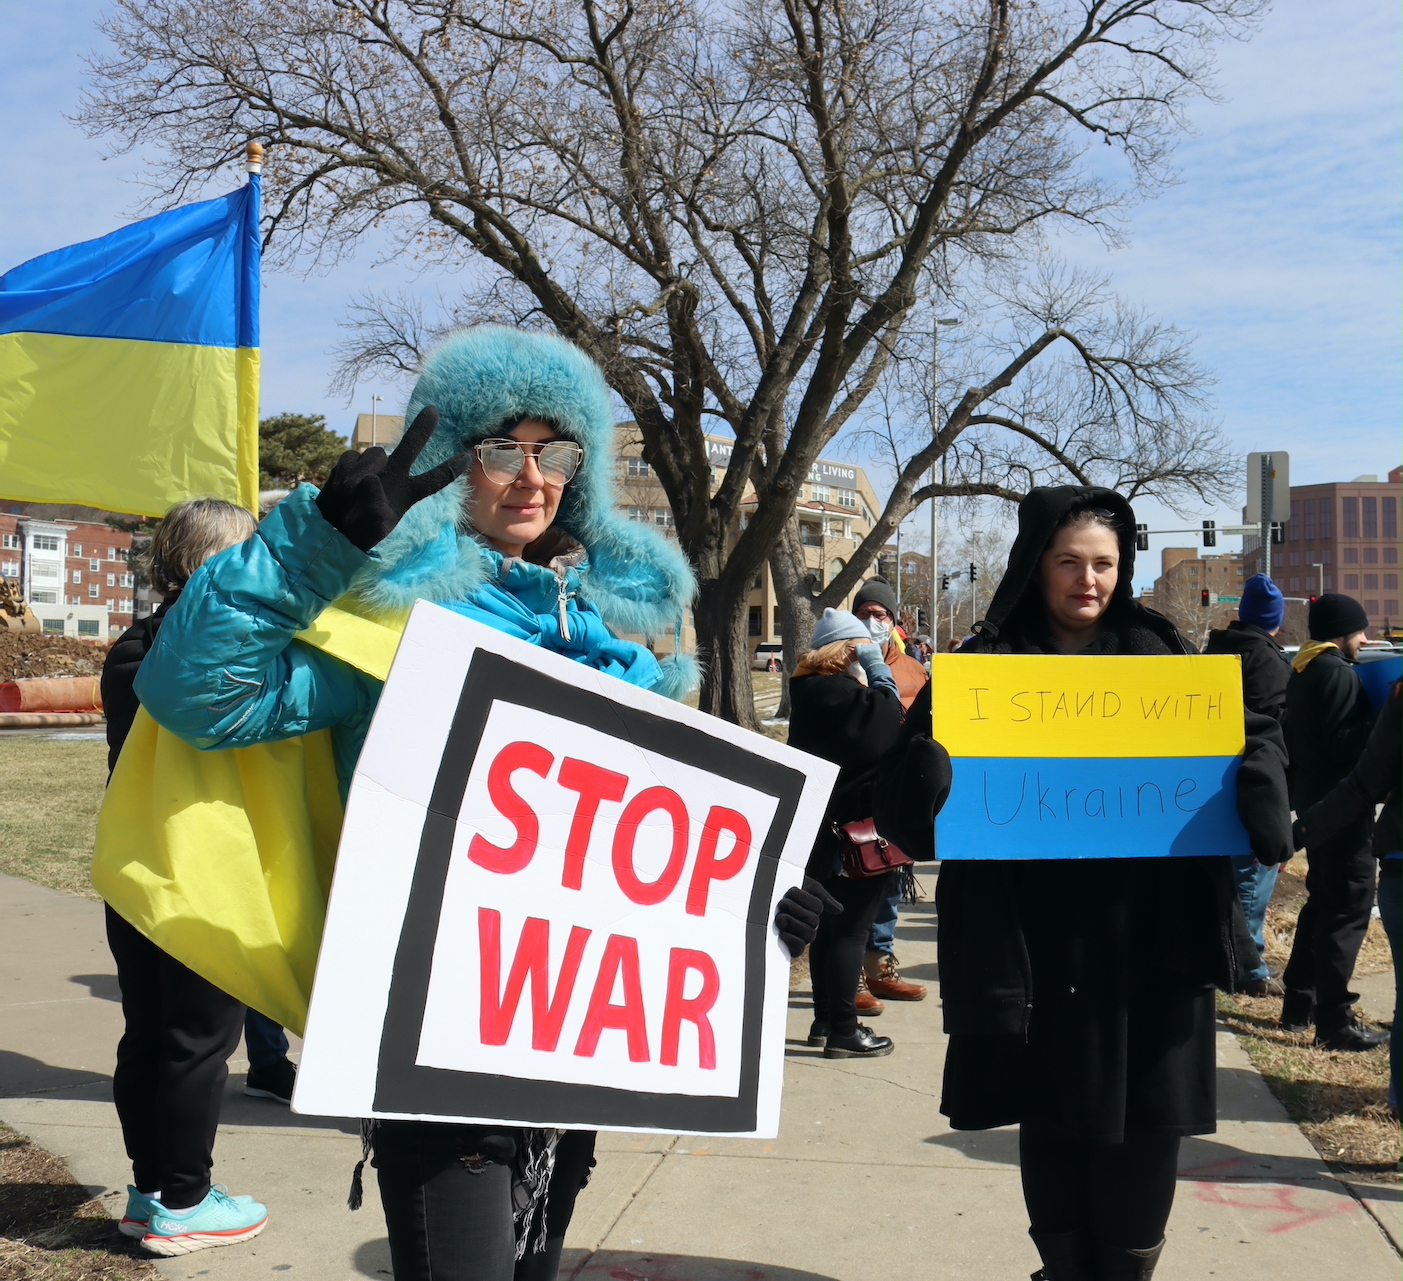 Woman in blue had holds sign that reads "stop war" she also holds up two fingers in a peace salute. Other woman on the right holds a yellow and blue sign that reads "I stand with Ukraine."